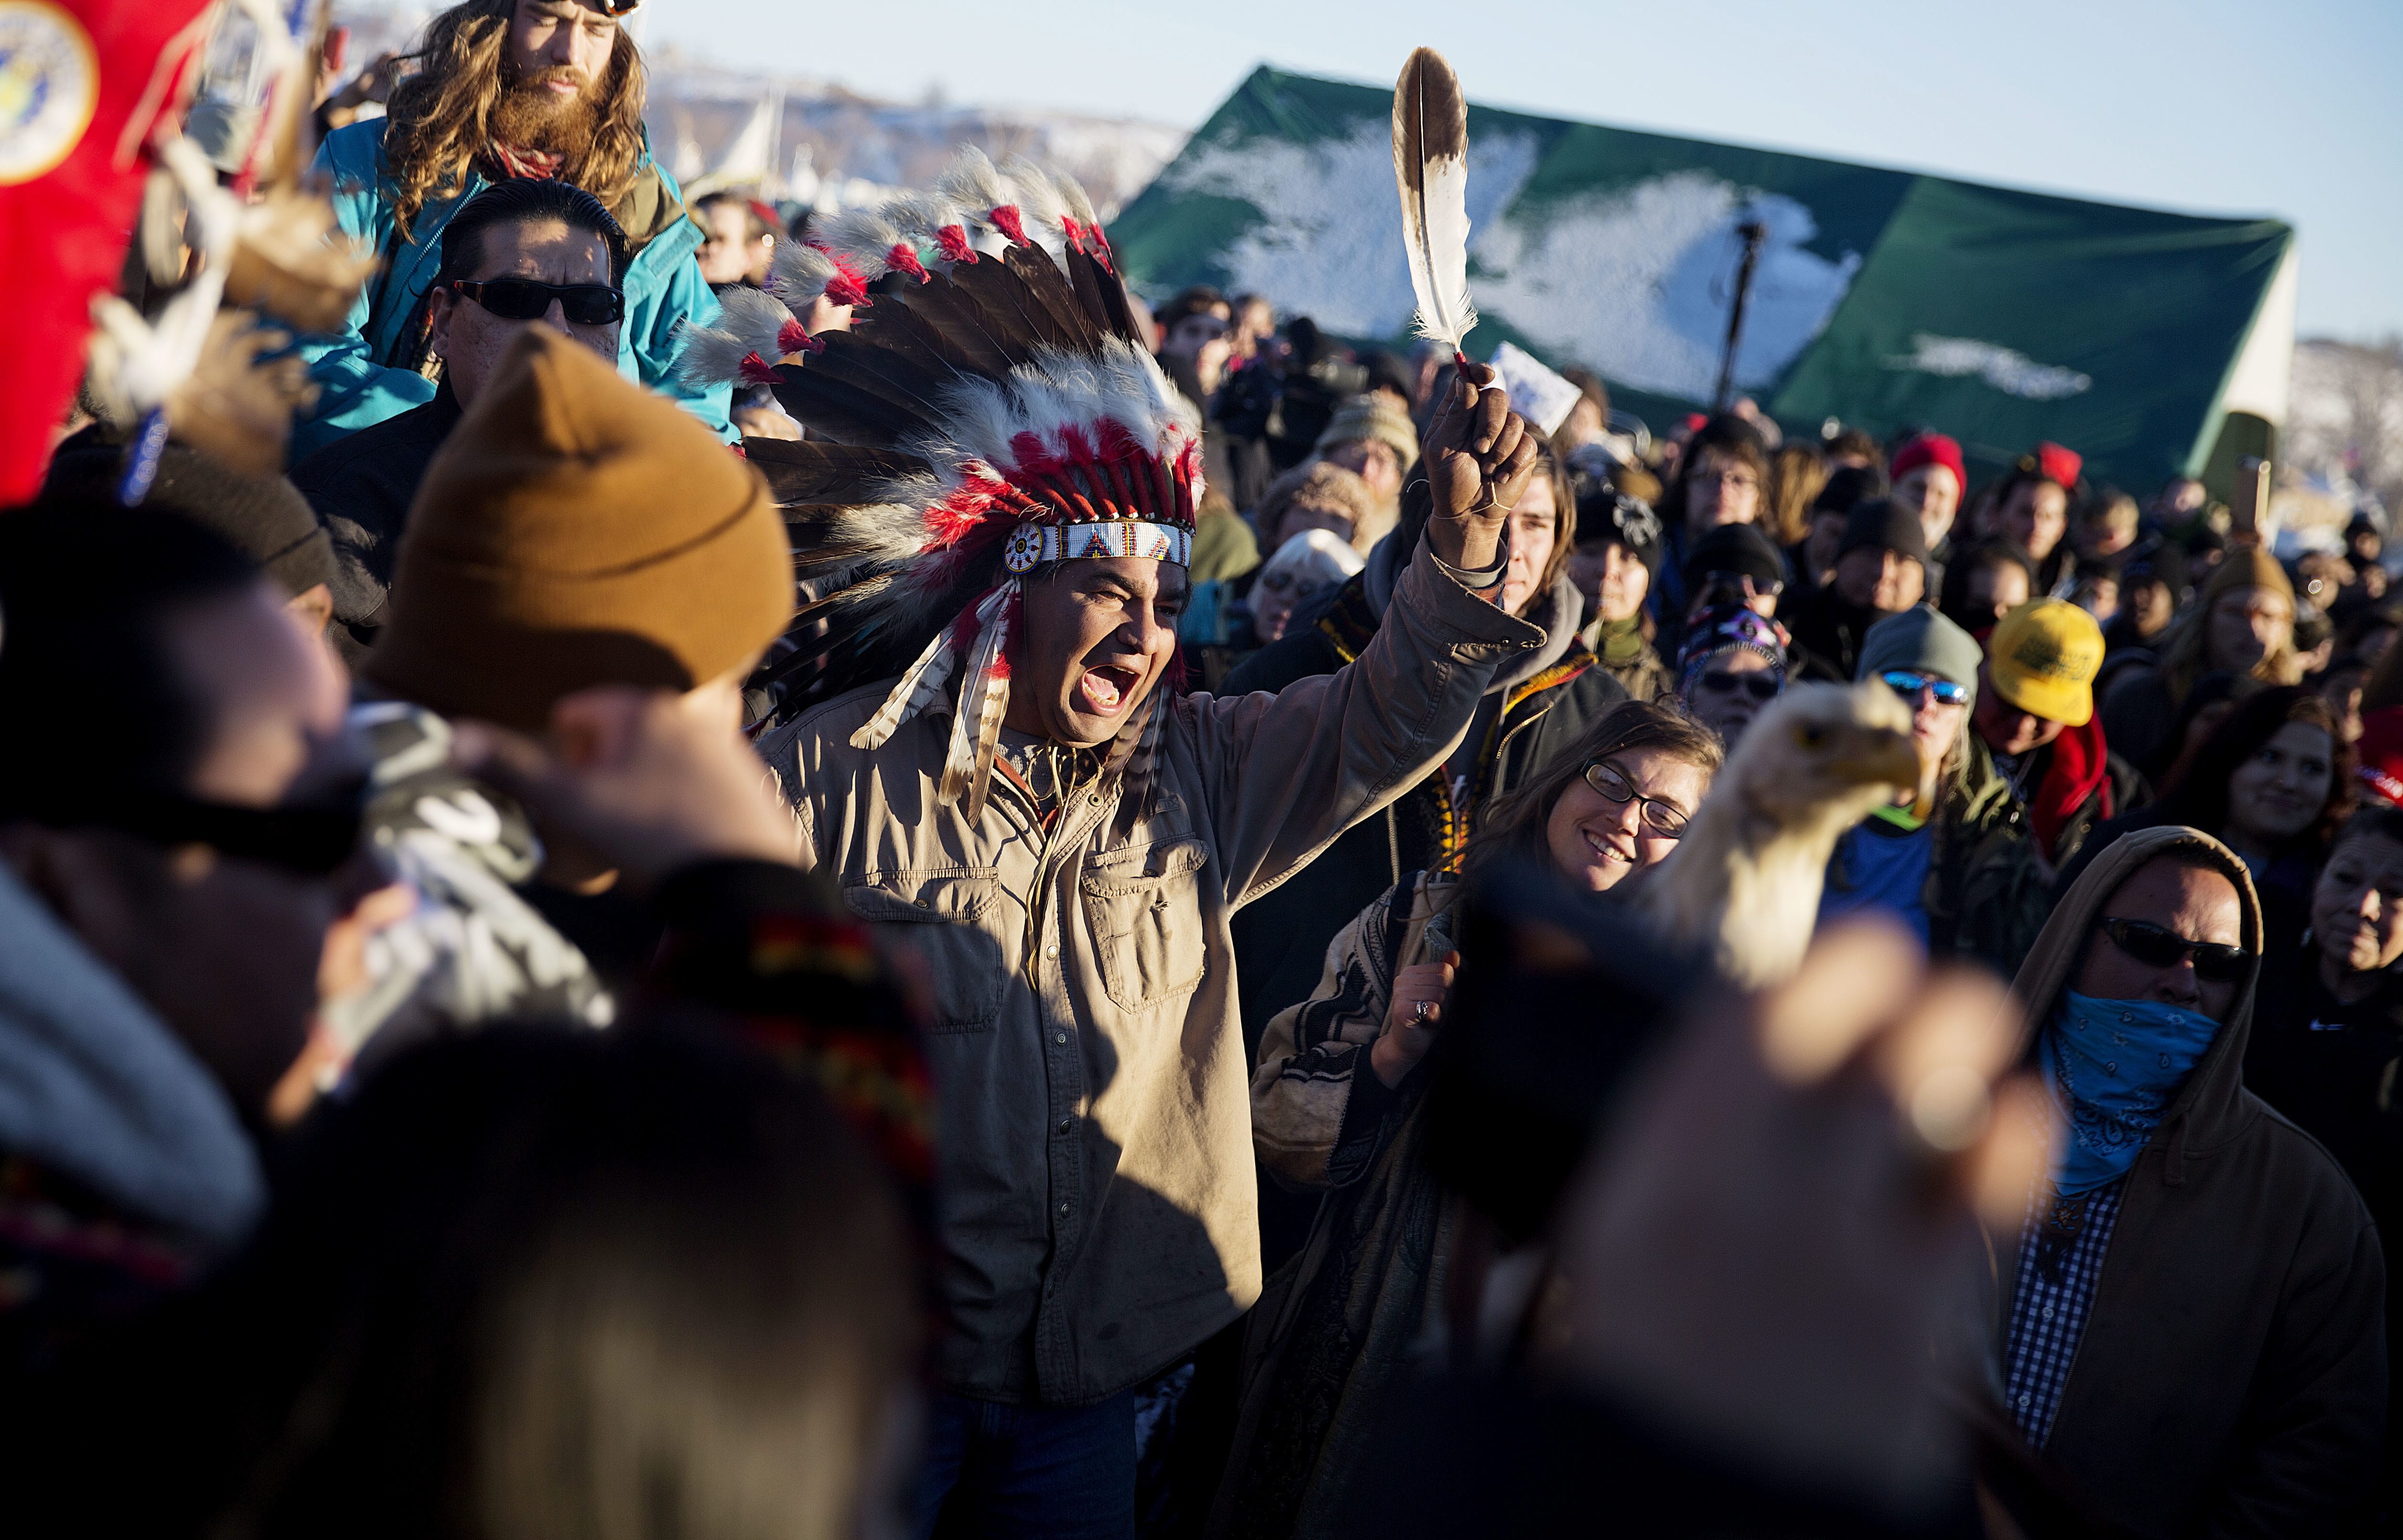 A crowd gathers in celebration at the Oceti Sakowin camp after it was announced that the U.S. Army Corps of Engineers won't grant easement for the Dakota Access oil pipeline in Cannon Ball, N.D., Sunday, Dec. 4, 2016.